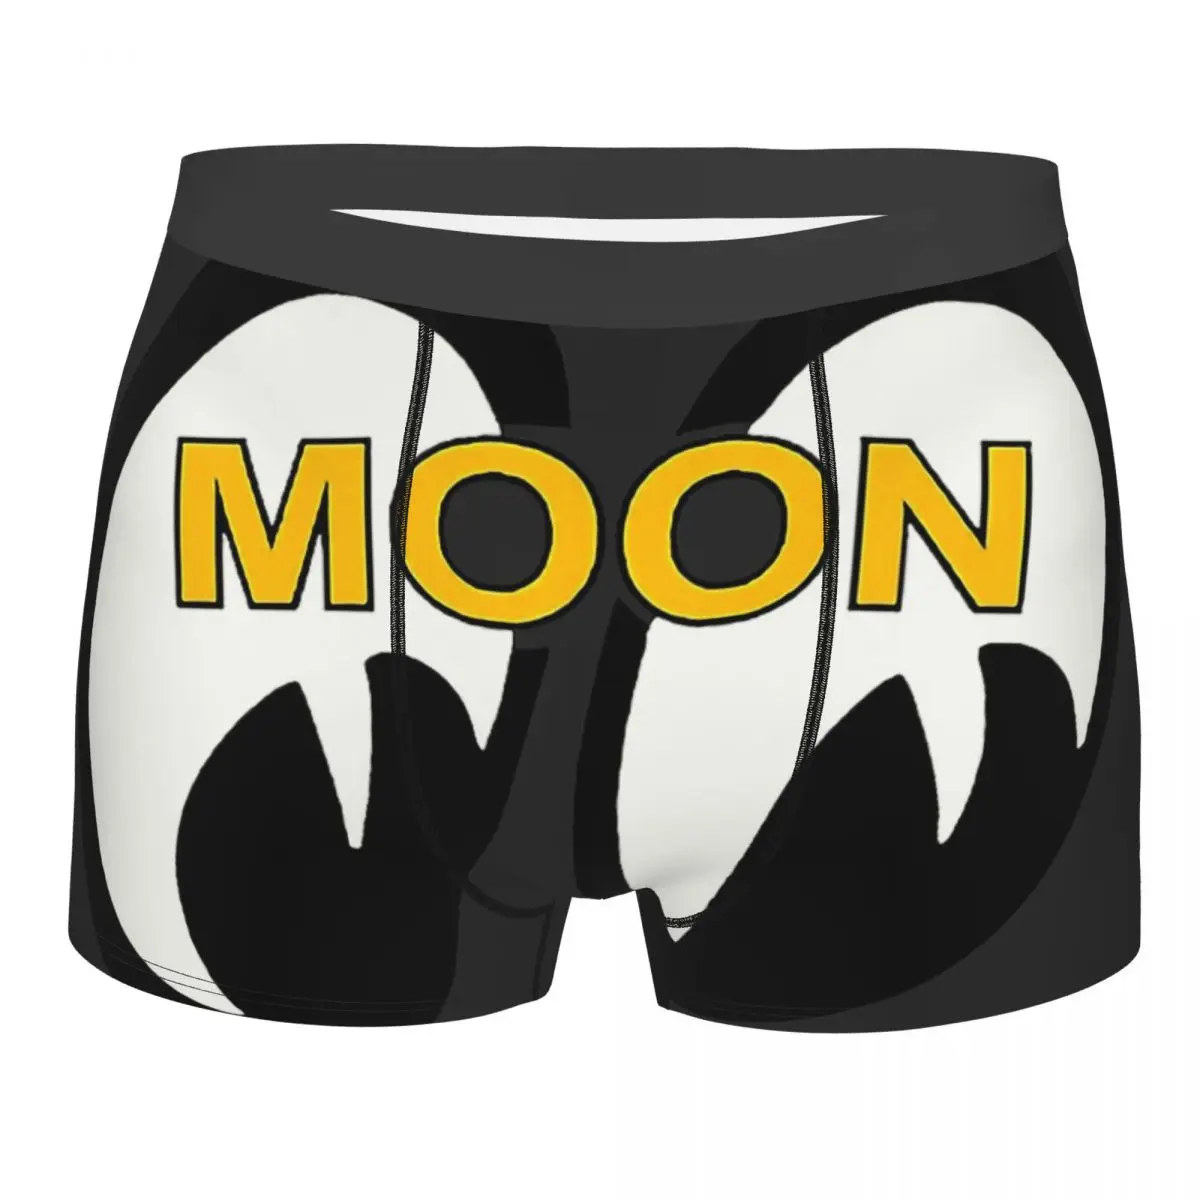 Mooneyes Moon Equipped Classic Men's Boxer Briefs special Highly Breathable Underpants Top Quality 3D Print Shorts Gift Idea pngtree farming tractor green men s boxer briefs special highly breathable underpants top quality 3d print shorts gift idea